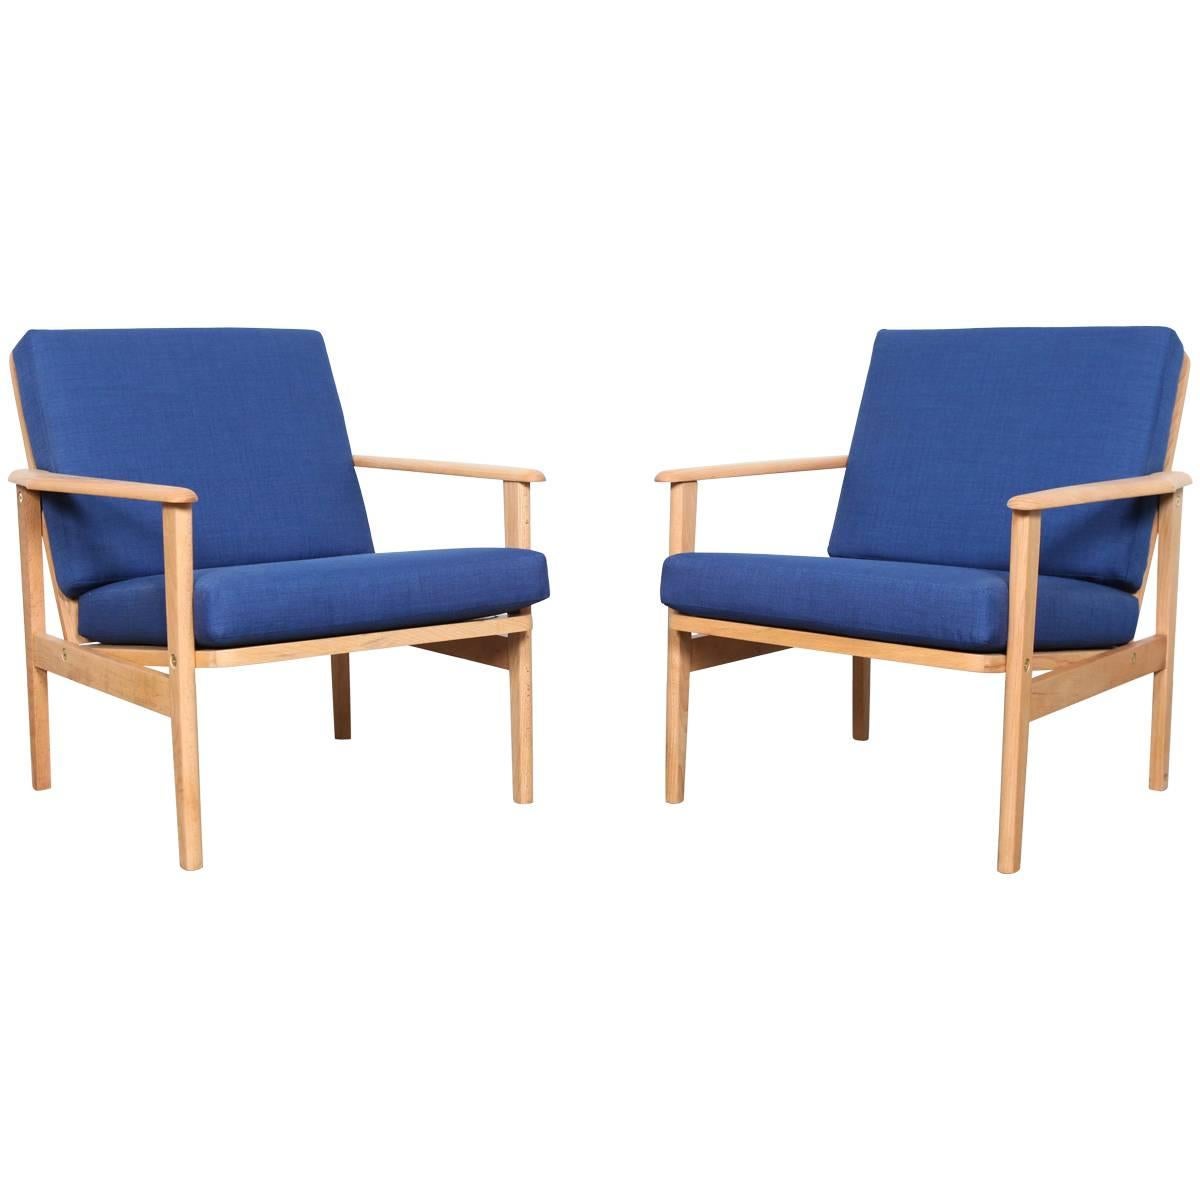 Pair of Mid-Century Modern Low Back Wood Framed Lounge Chairs